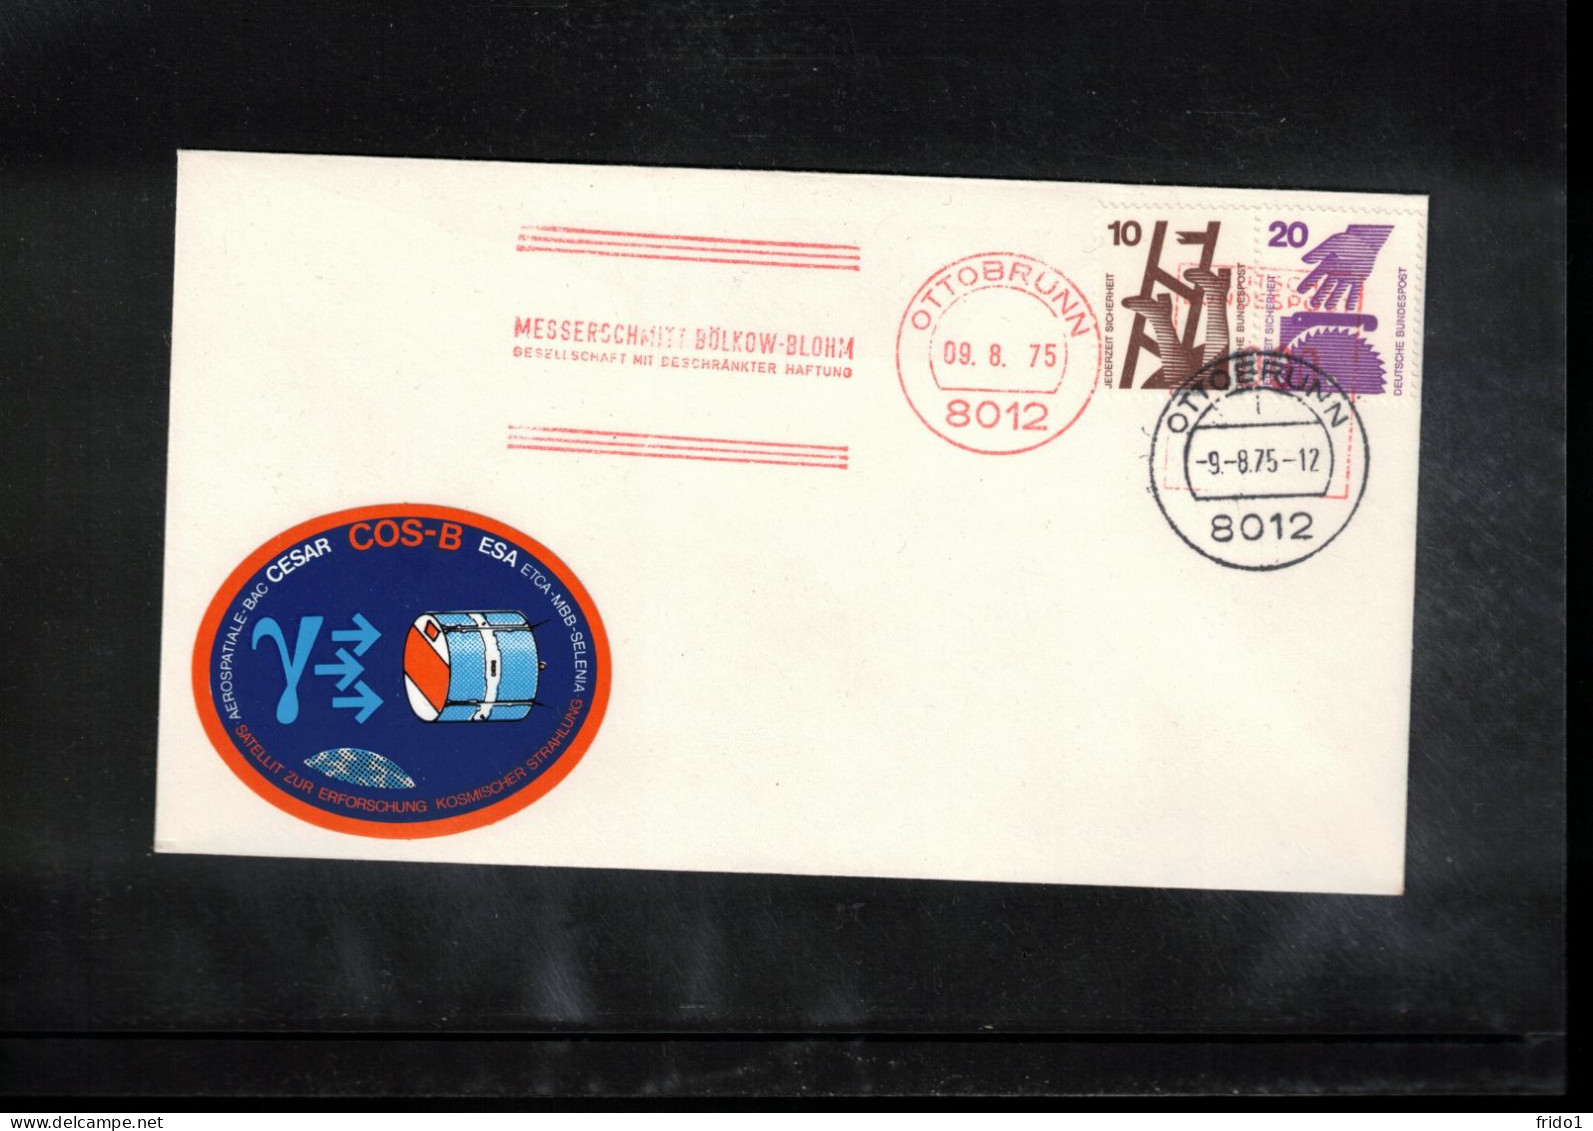 Germany 1975 Space / Weltraum ESA-USA Satellite COS-B Interesting Cover - USA